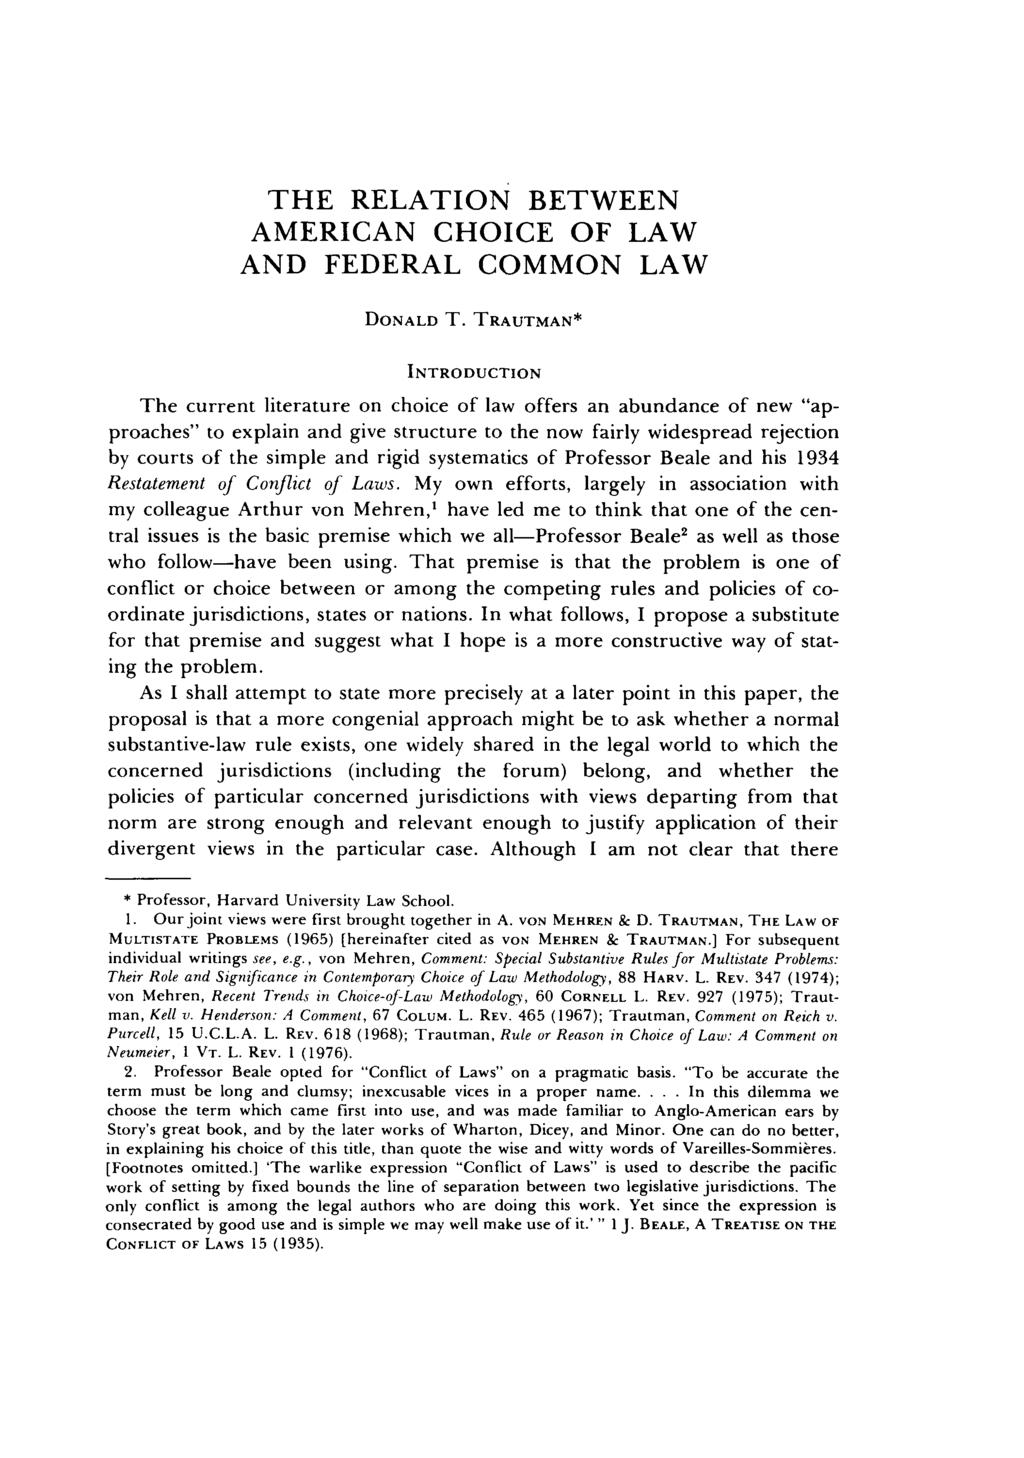 THE RELATION BETWEEN AMERICAN CHOICE OF LAW AND FEDERAL COMMON LAW DONALD T.